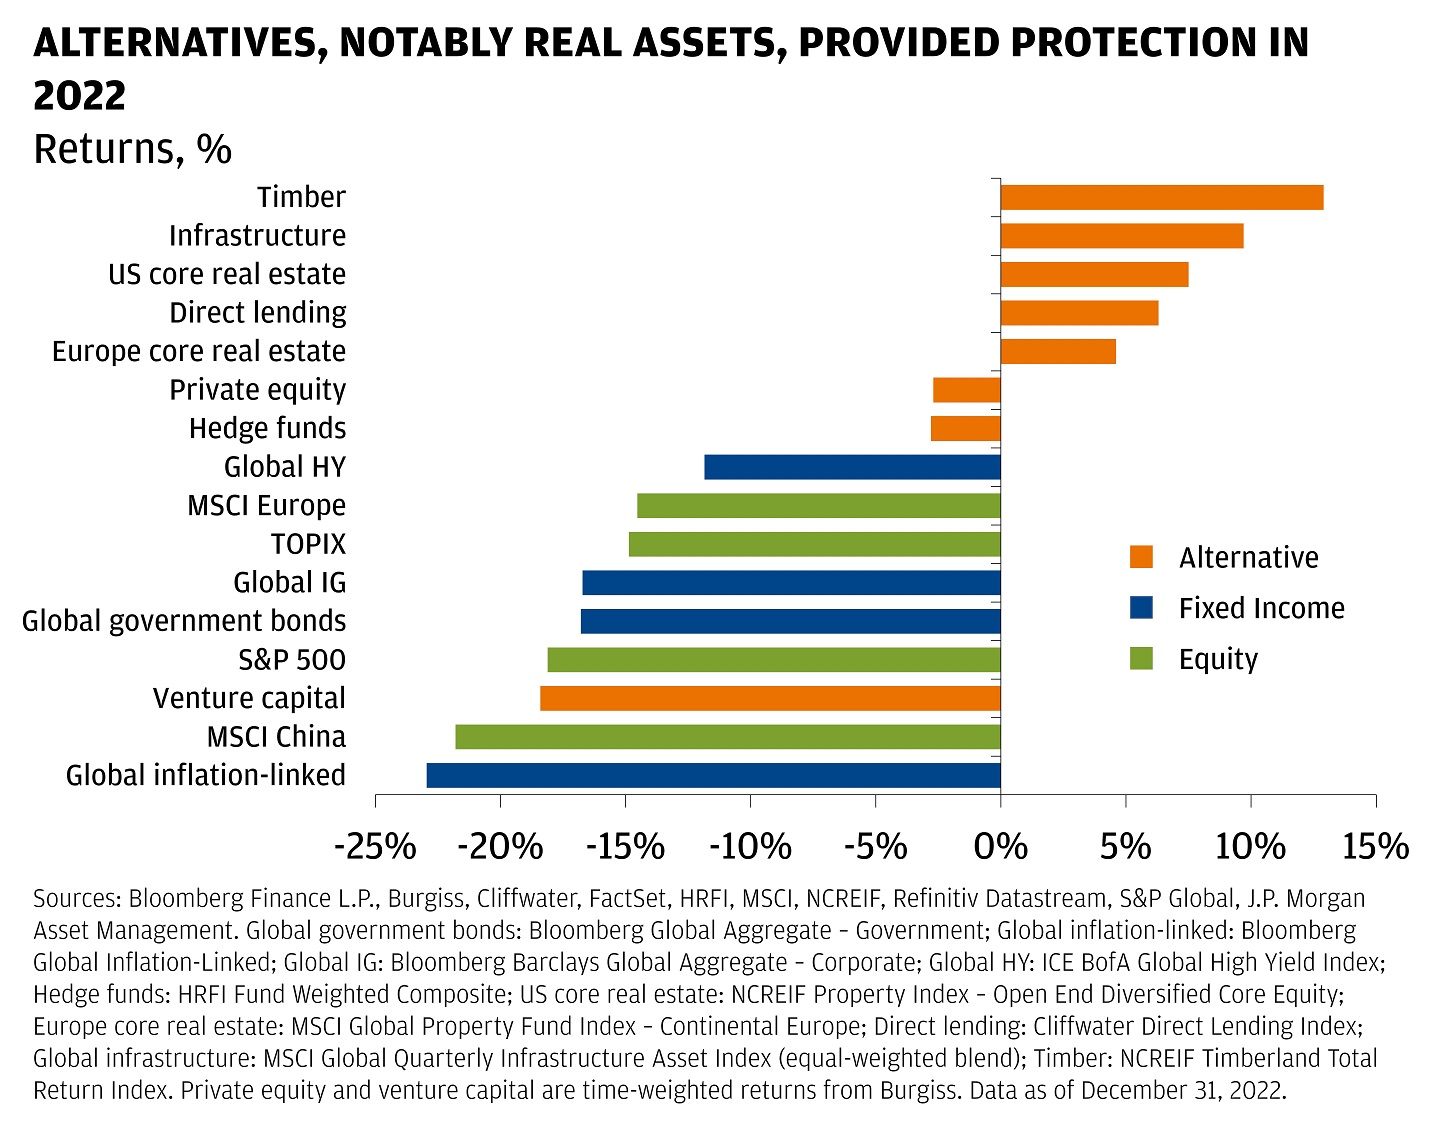 This chart shows the 2022 returns in percentage terms of alternative assets as of December 31st, 2022. 